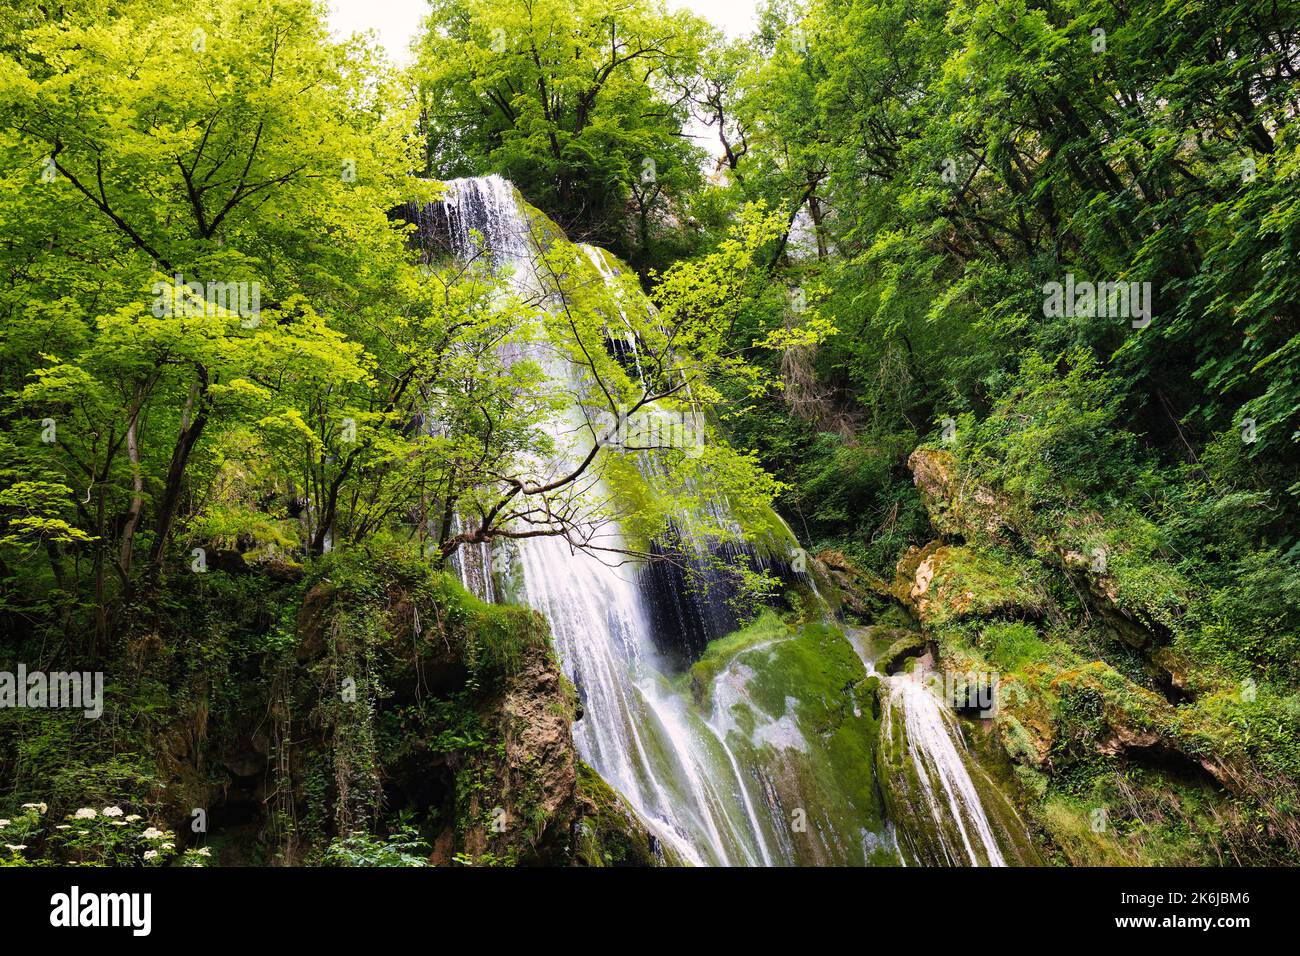 The Autoire waterfall in the Lot Department, France Stock Photo